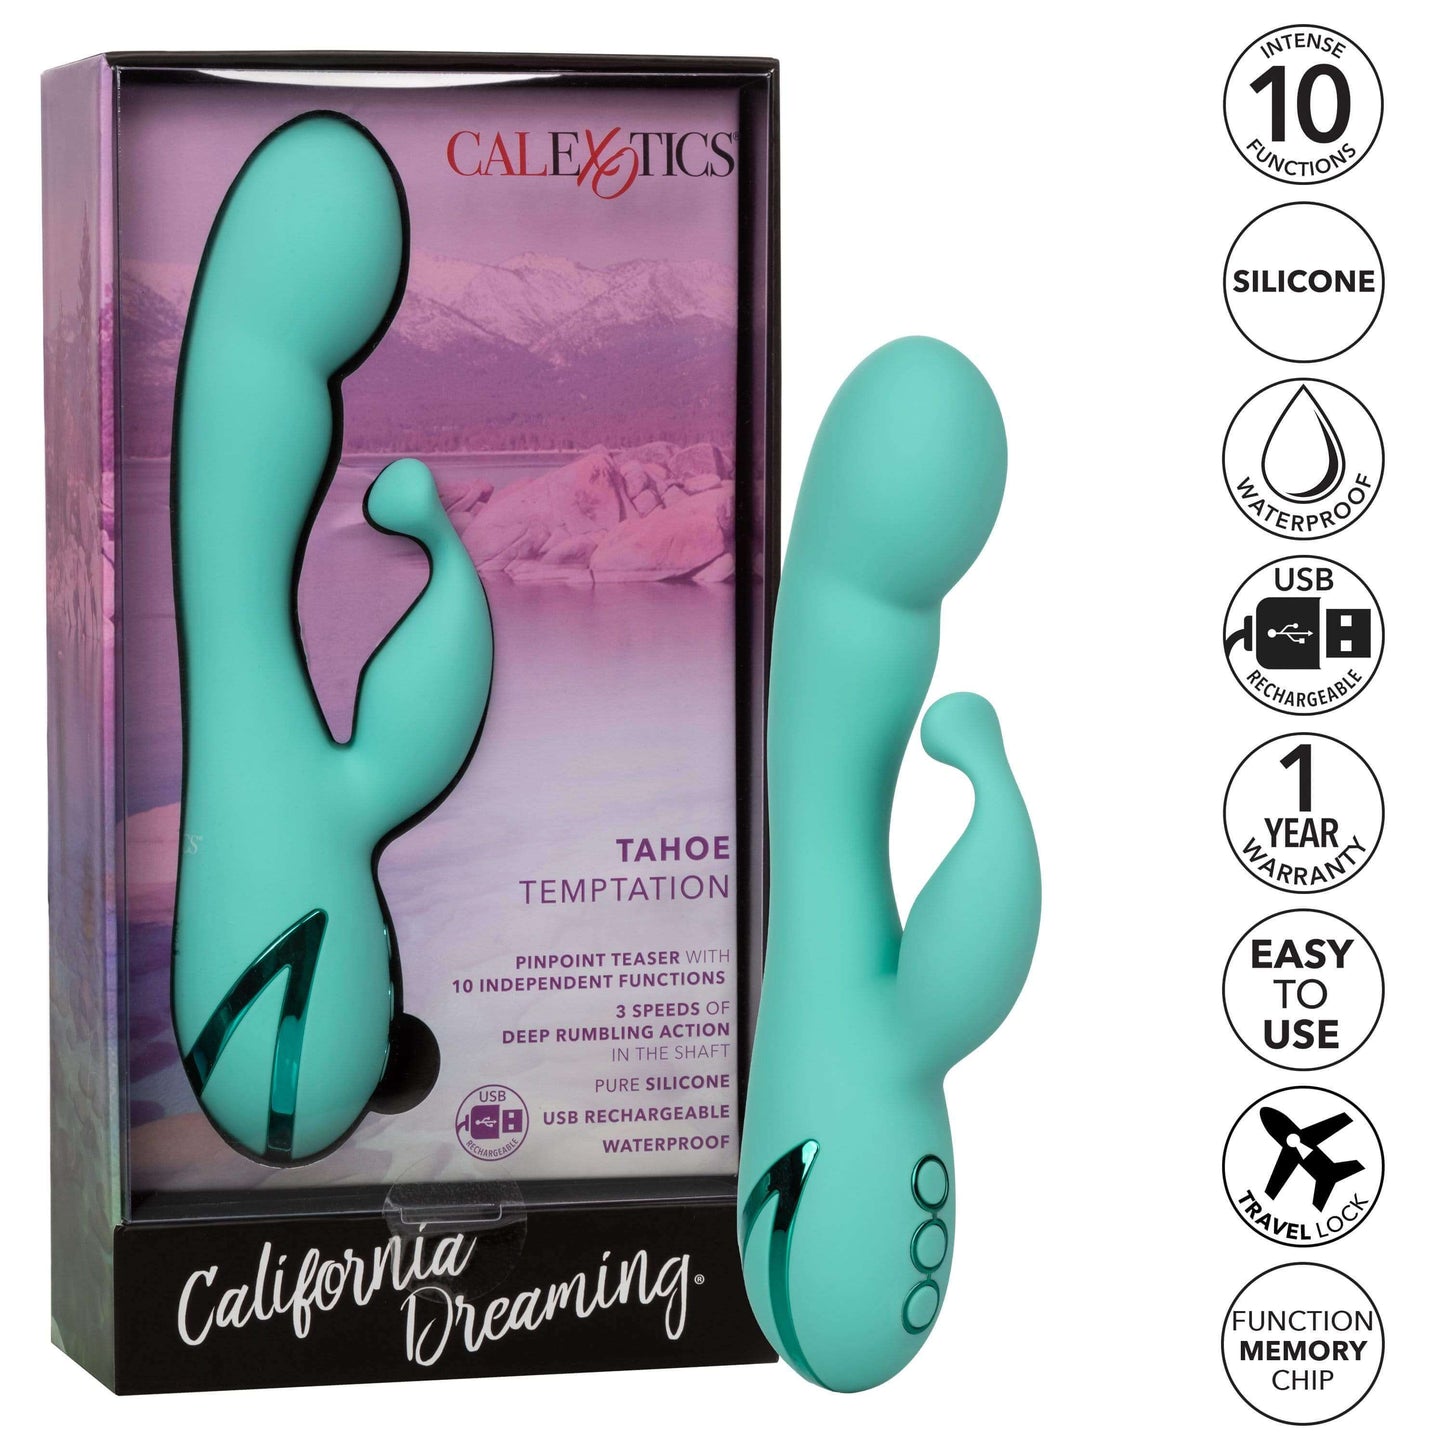 California Dreaming Tahoe Temptation Double Vibrator - Thorn & Feather Sex Toy Canada